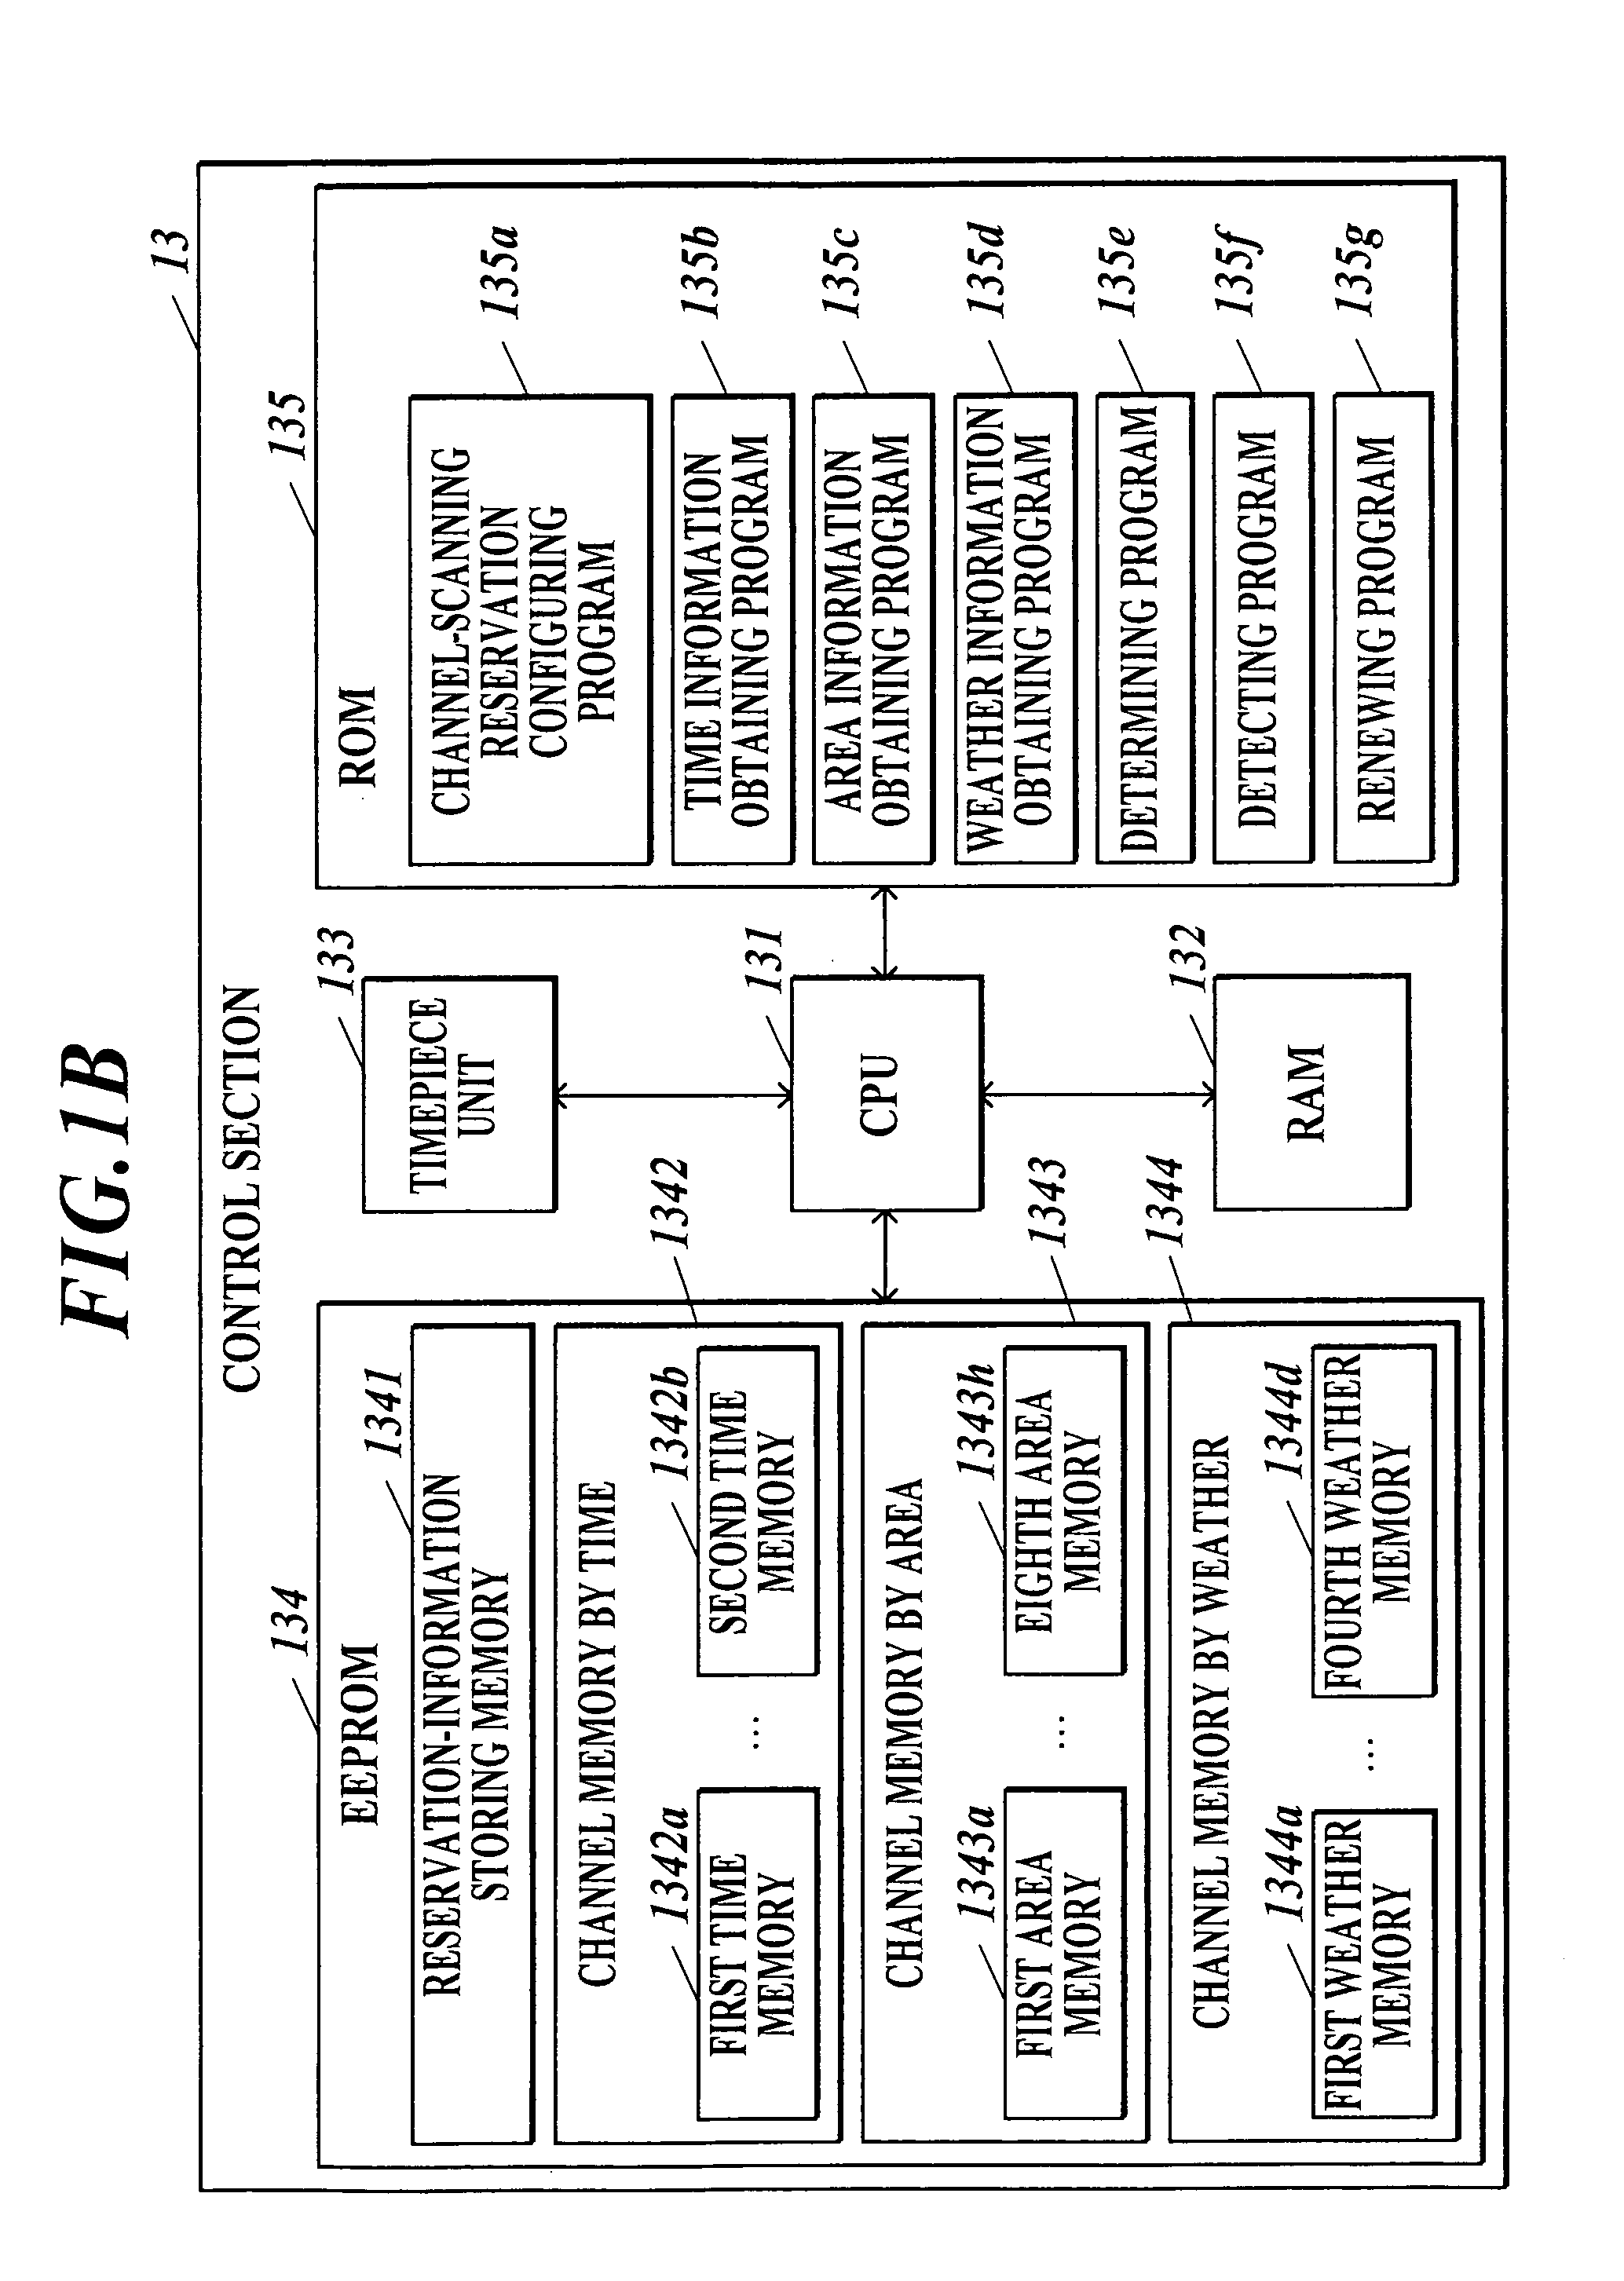 Broadcast reception device and method for renewing channel information in broadcast reception device